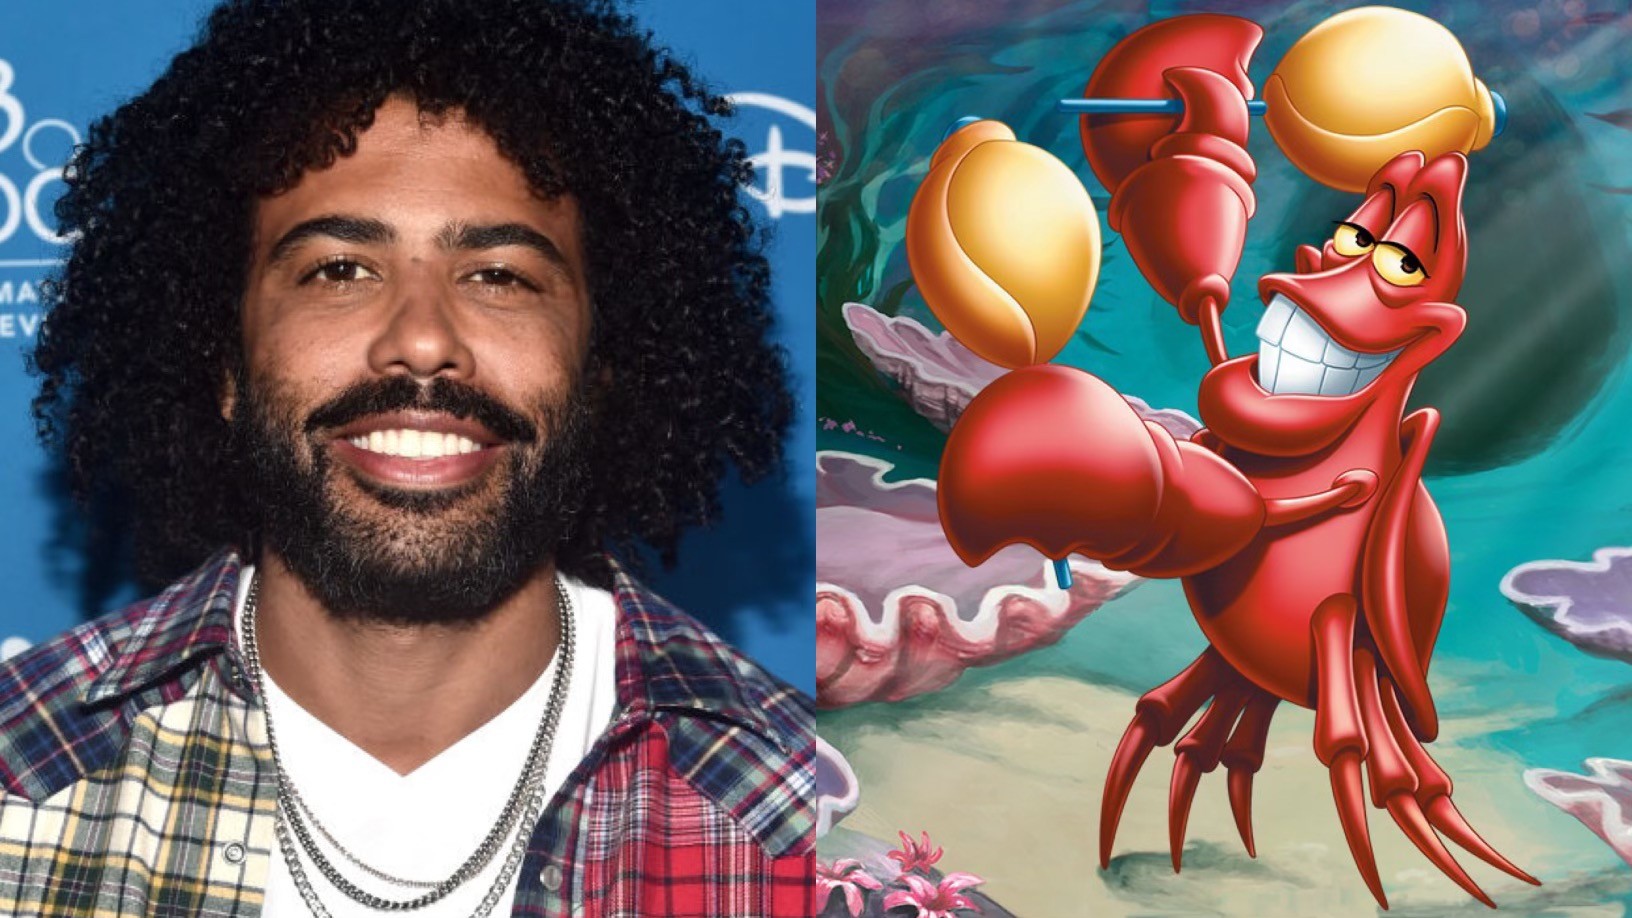 Daveed Diggs on Playing Sebastian in 'The Little Mermaid' Daily